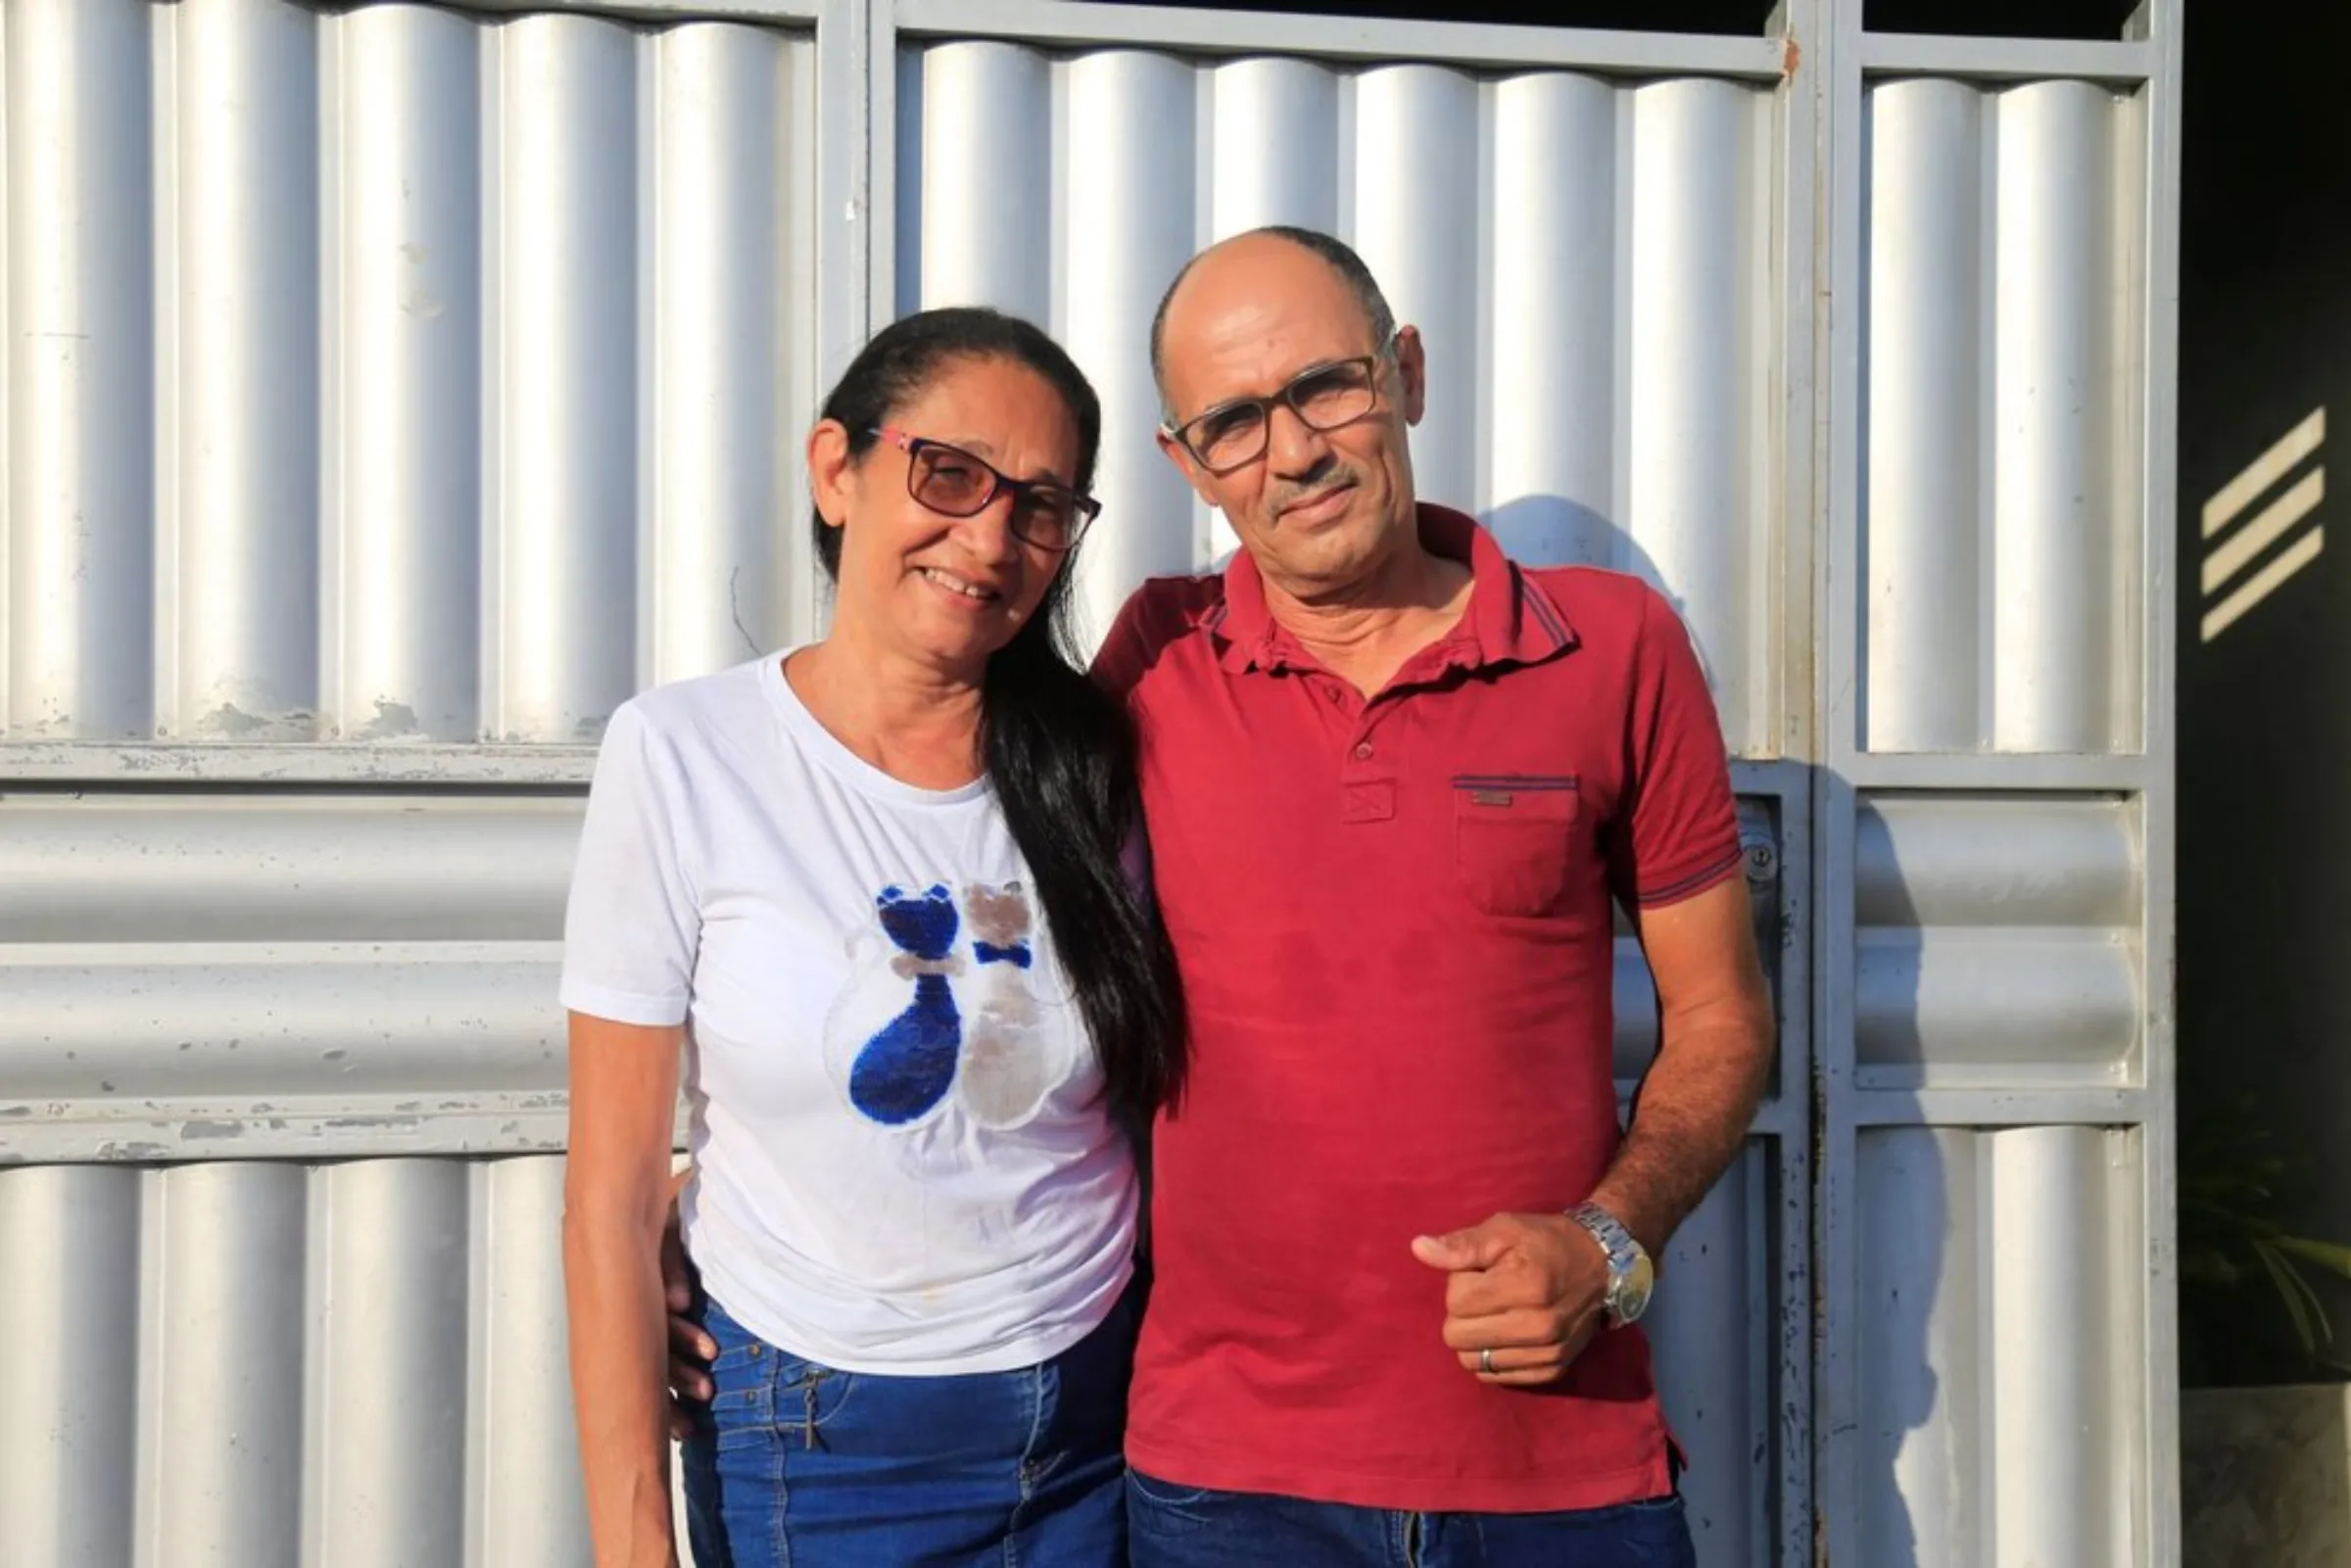 Jose Cicero Lemos, a former sugarcane worker, stands with his wife in Atalaia, Brazil, September 26, 2021